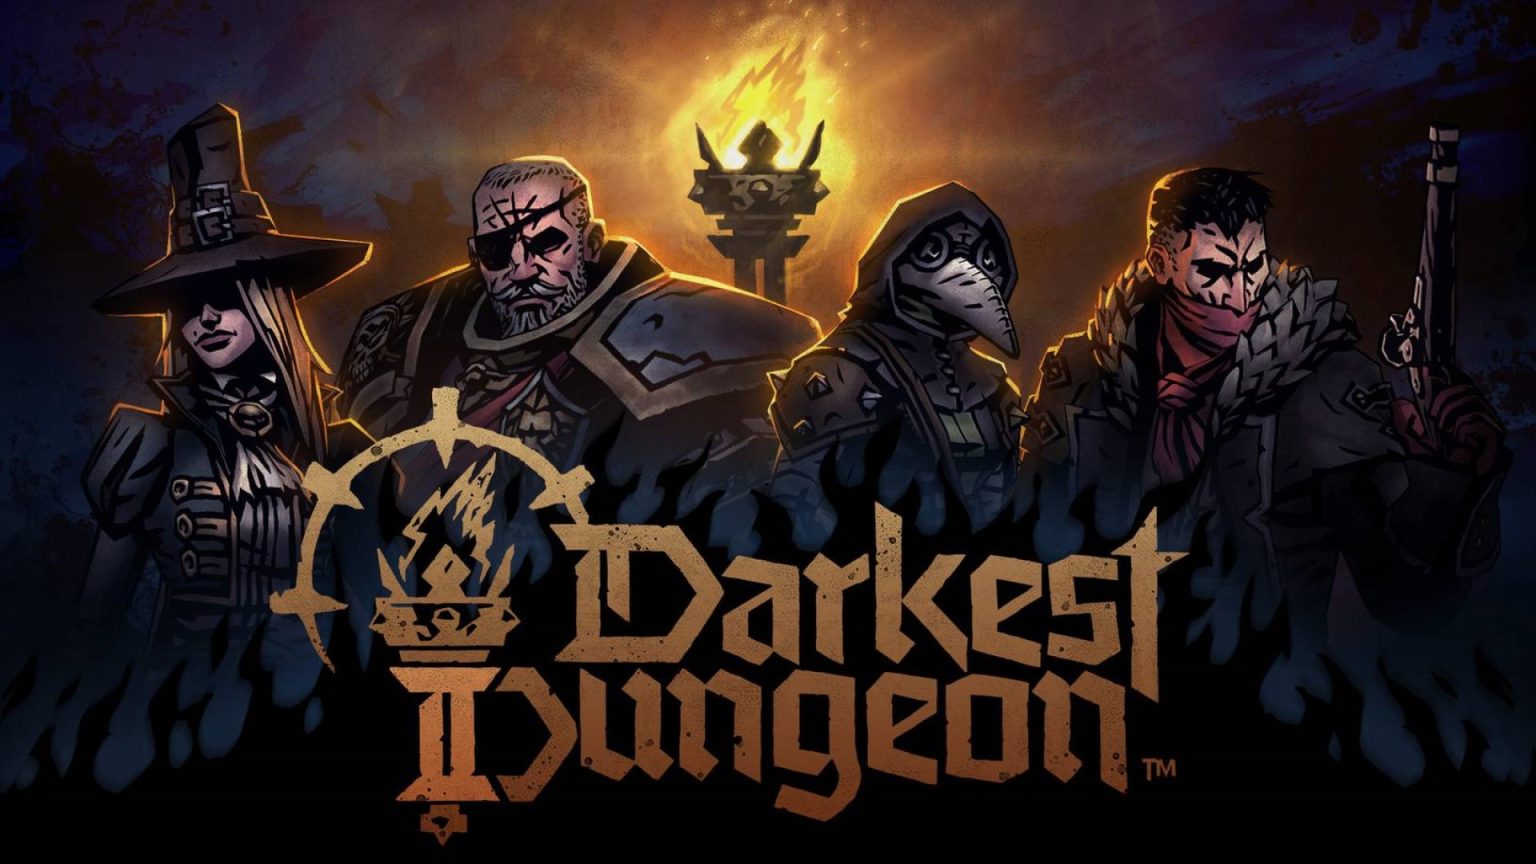 Darkest Dungeon 2 will also be available on Nintendo Switch on 15th July